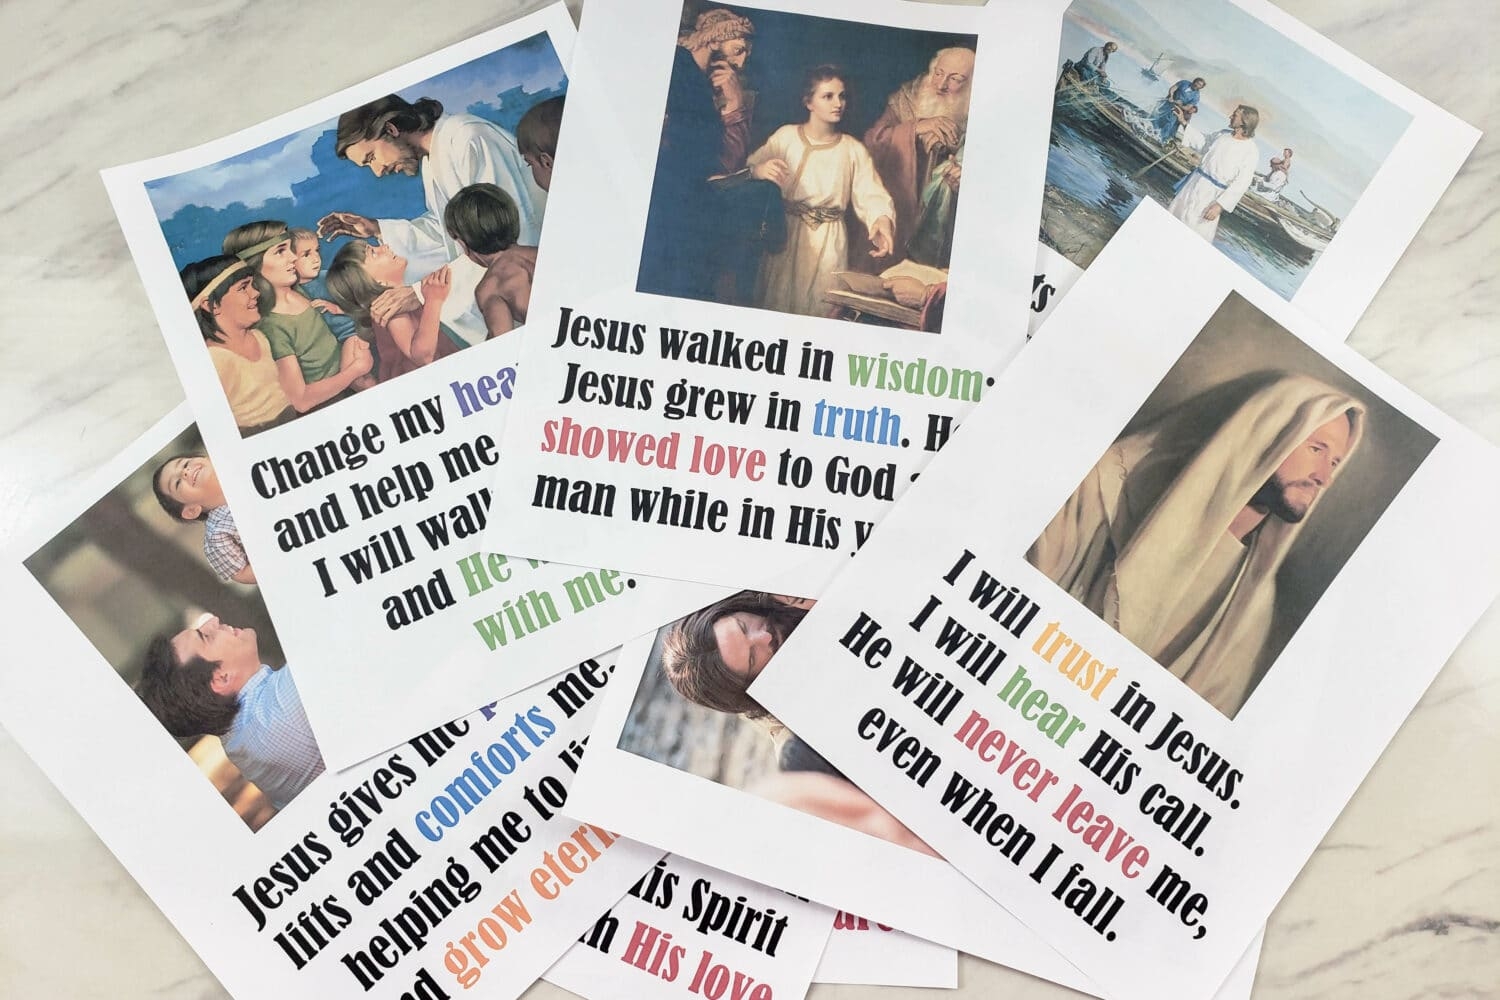 I Will Walk With Jesus Dropped Pictures Primary Singing